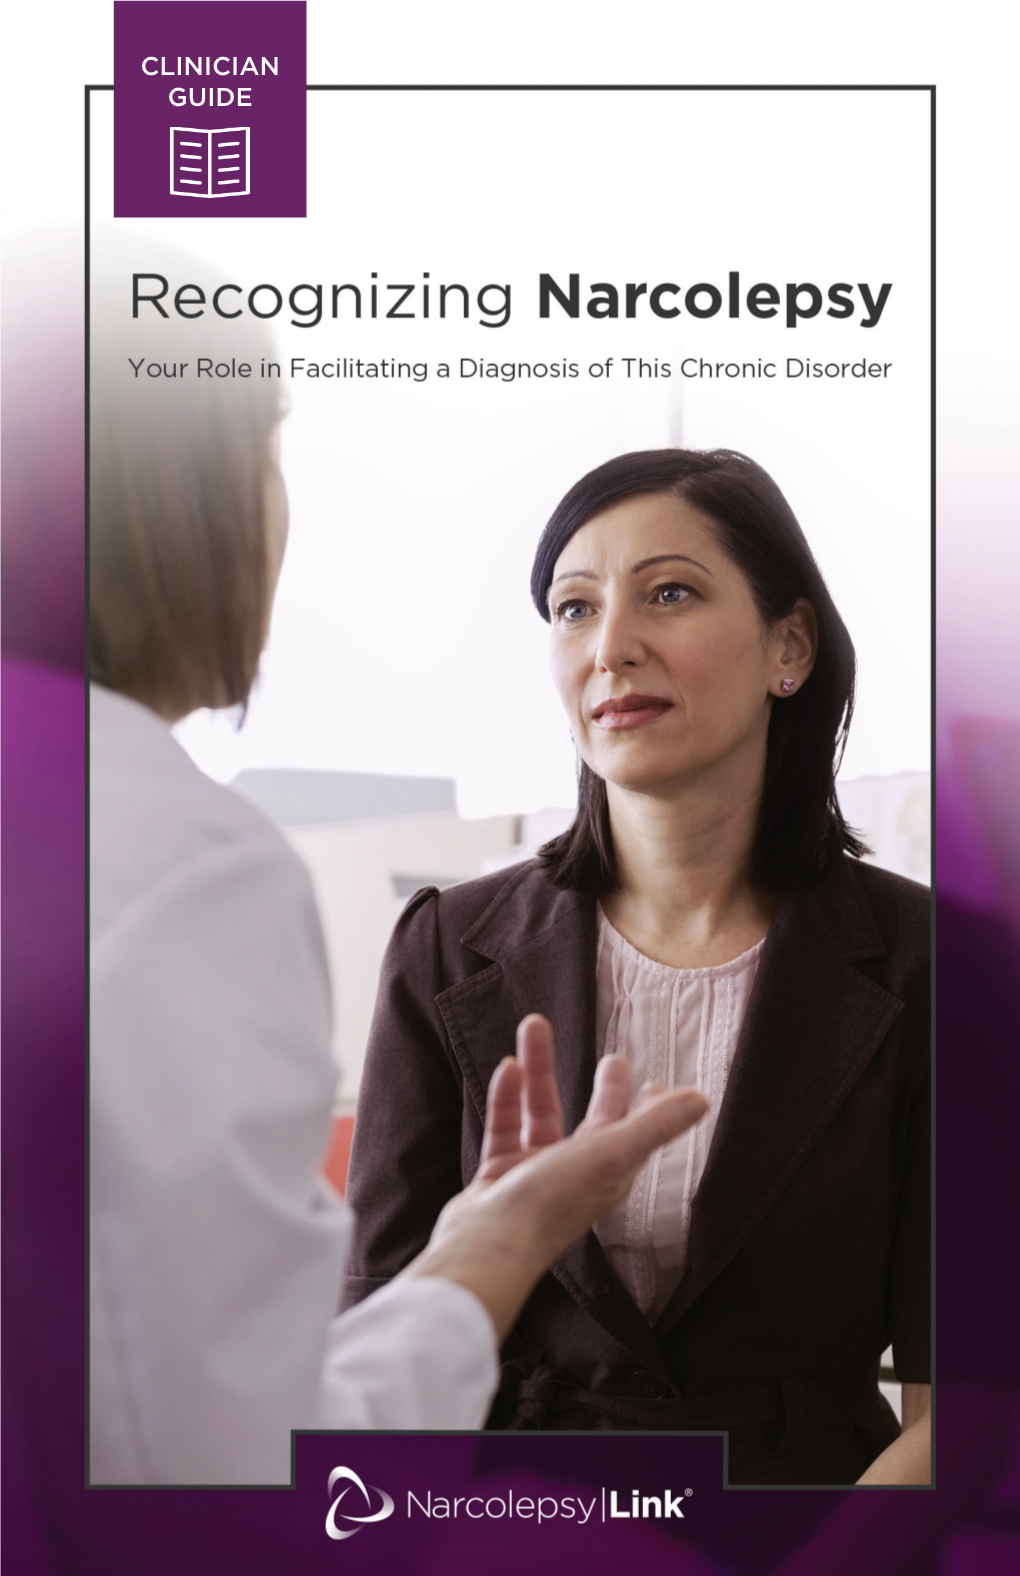 Clinical Guide: Recognizing Narcolepsy